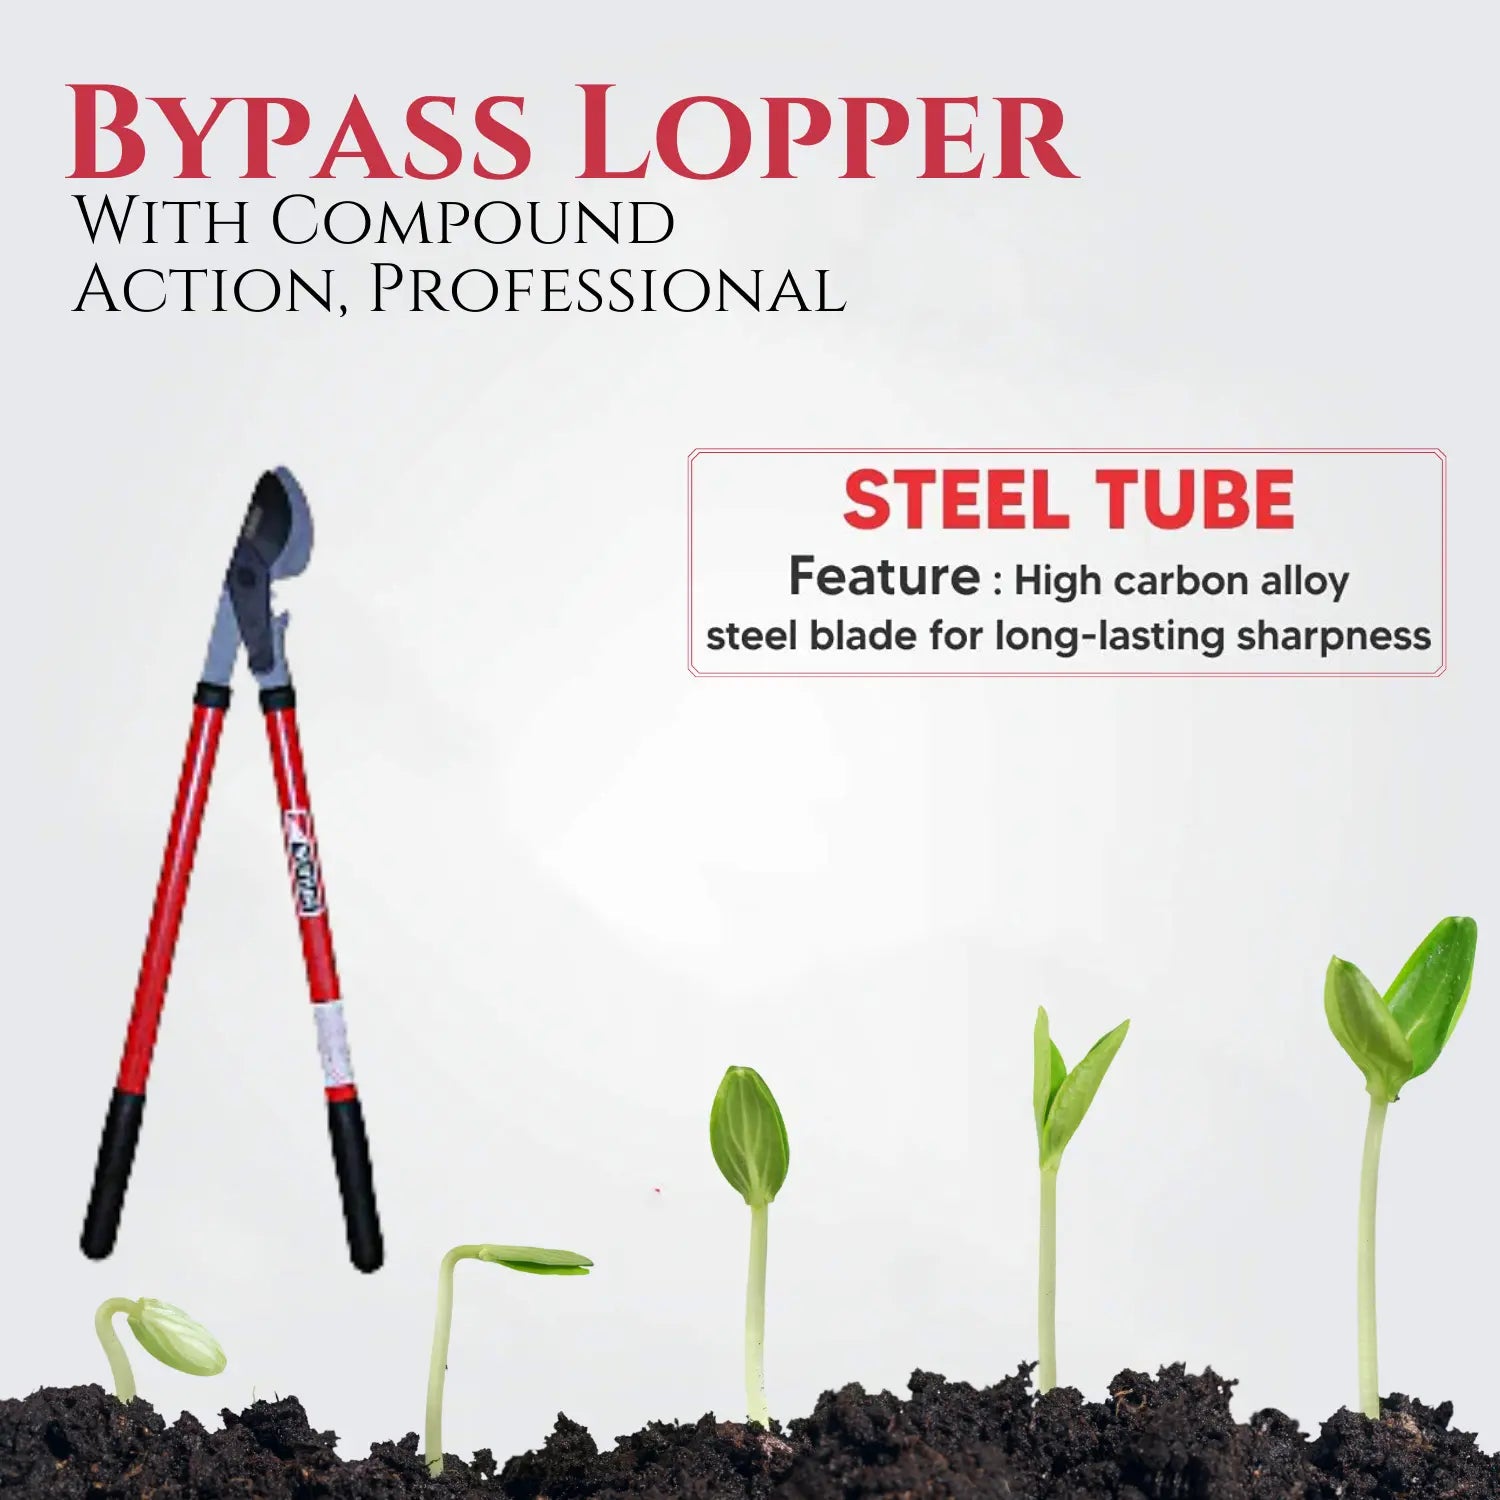 Bypass Lopper with Compound Action, Professional Bypass Lopper, Tree Trimmers Secateurs with Shock Absorbing Effort-Saving Handle Garden Lopper - Pruning Tool